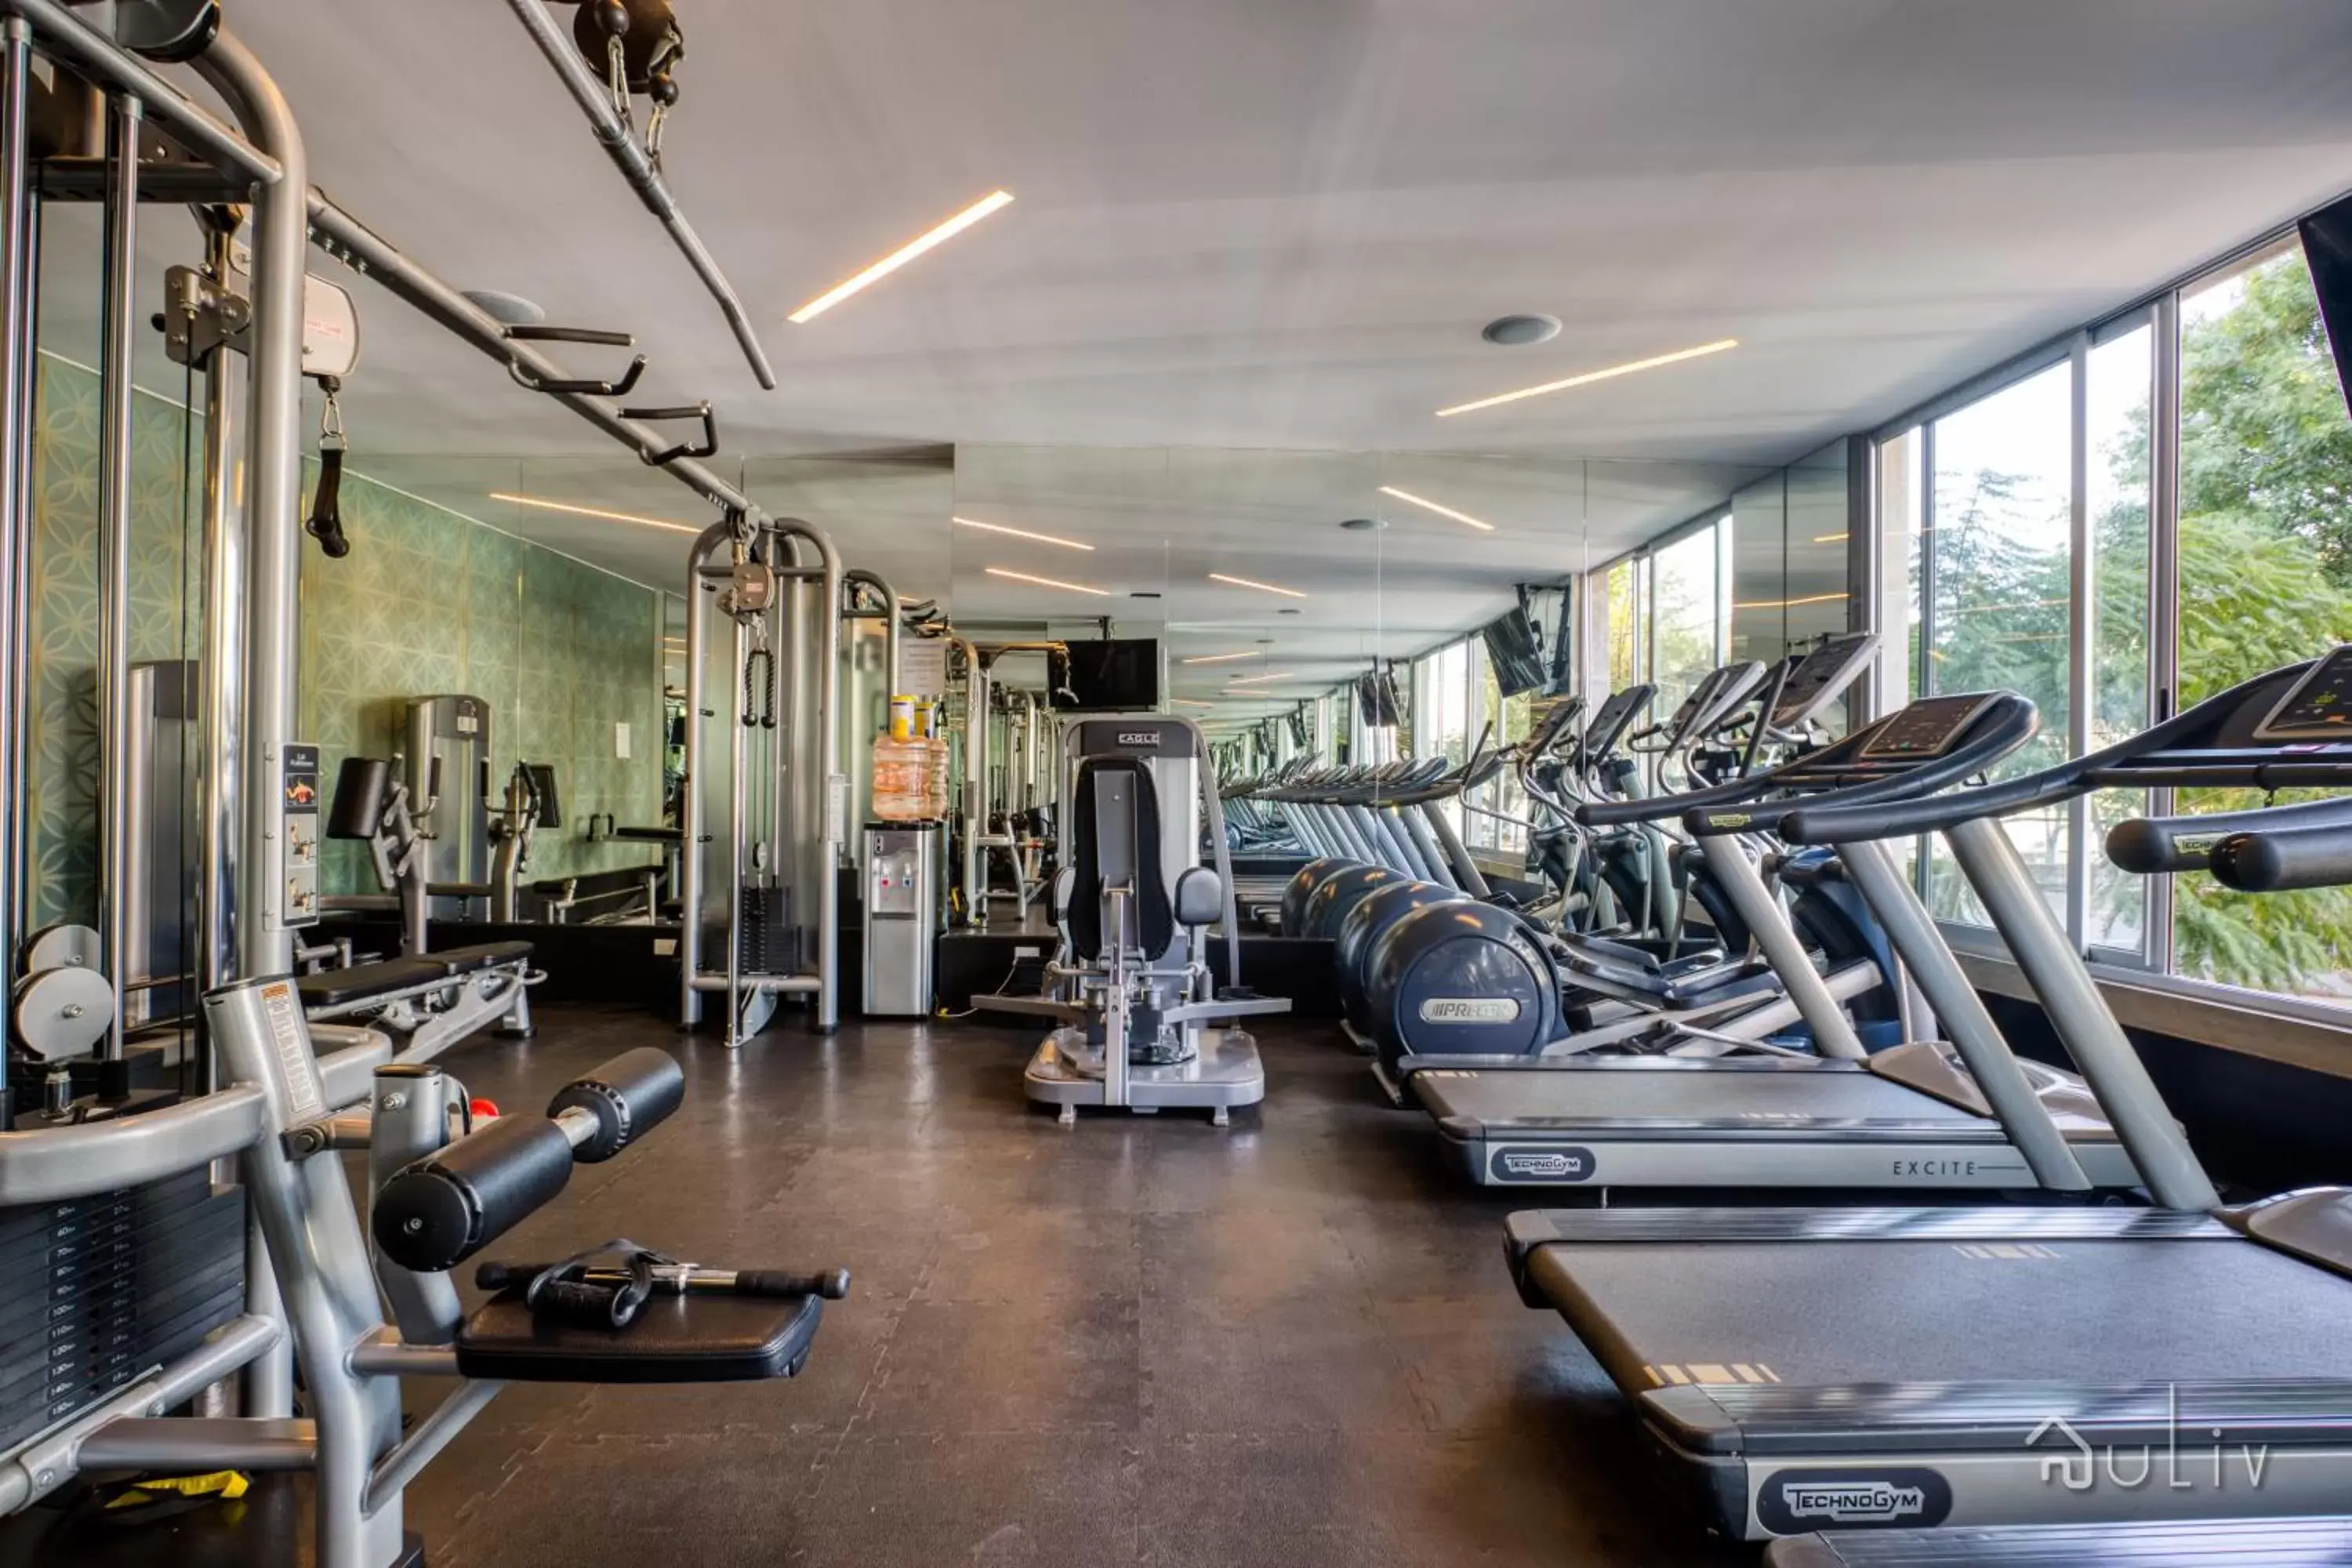 Fitness centre/facilities, Fitness Center/Facilities in ULIV Polanco